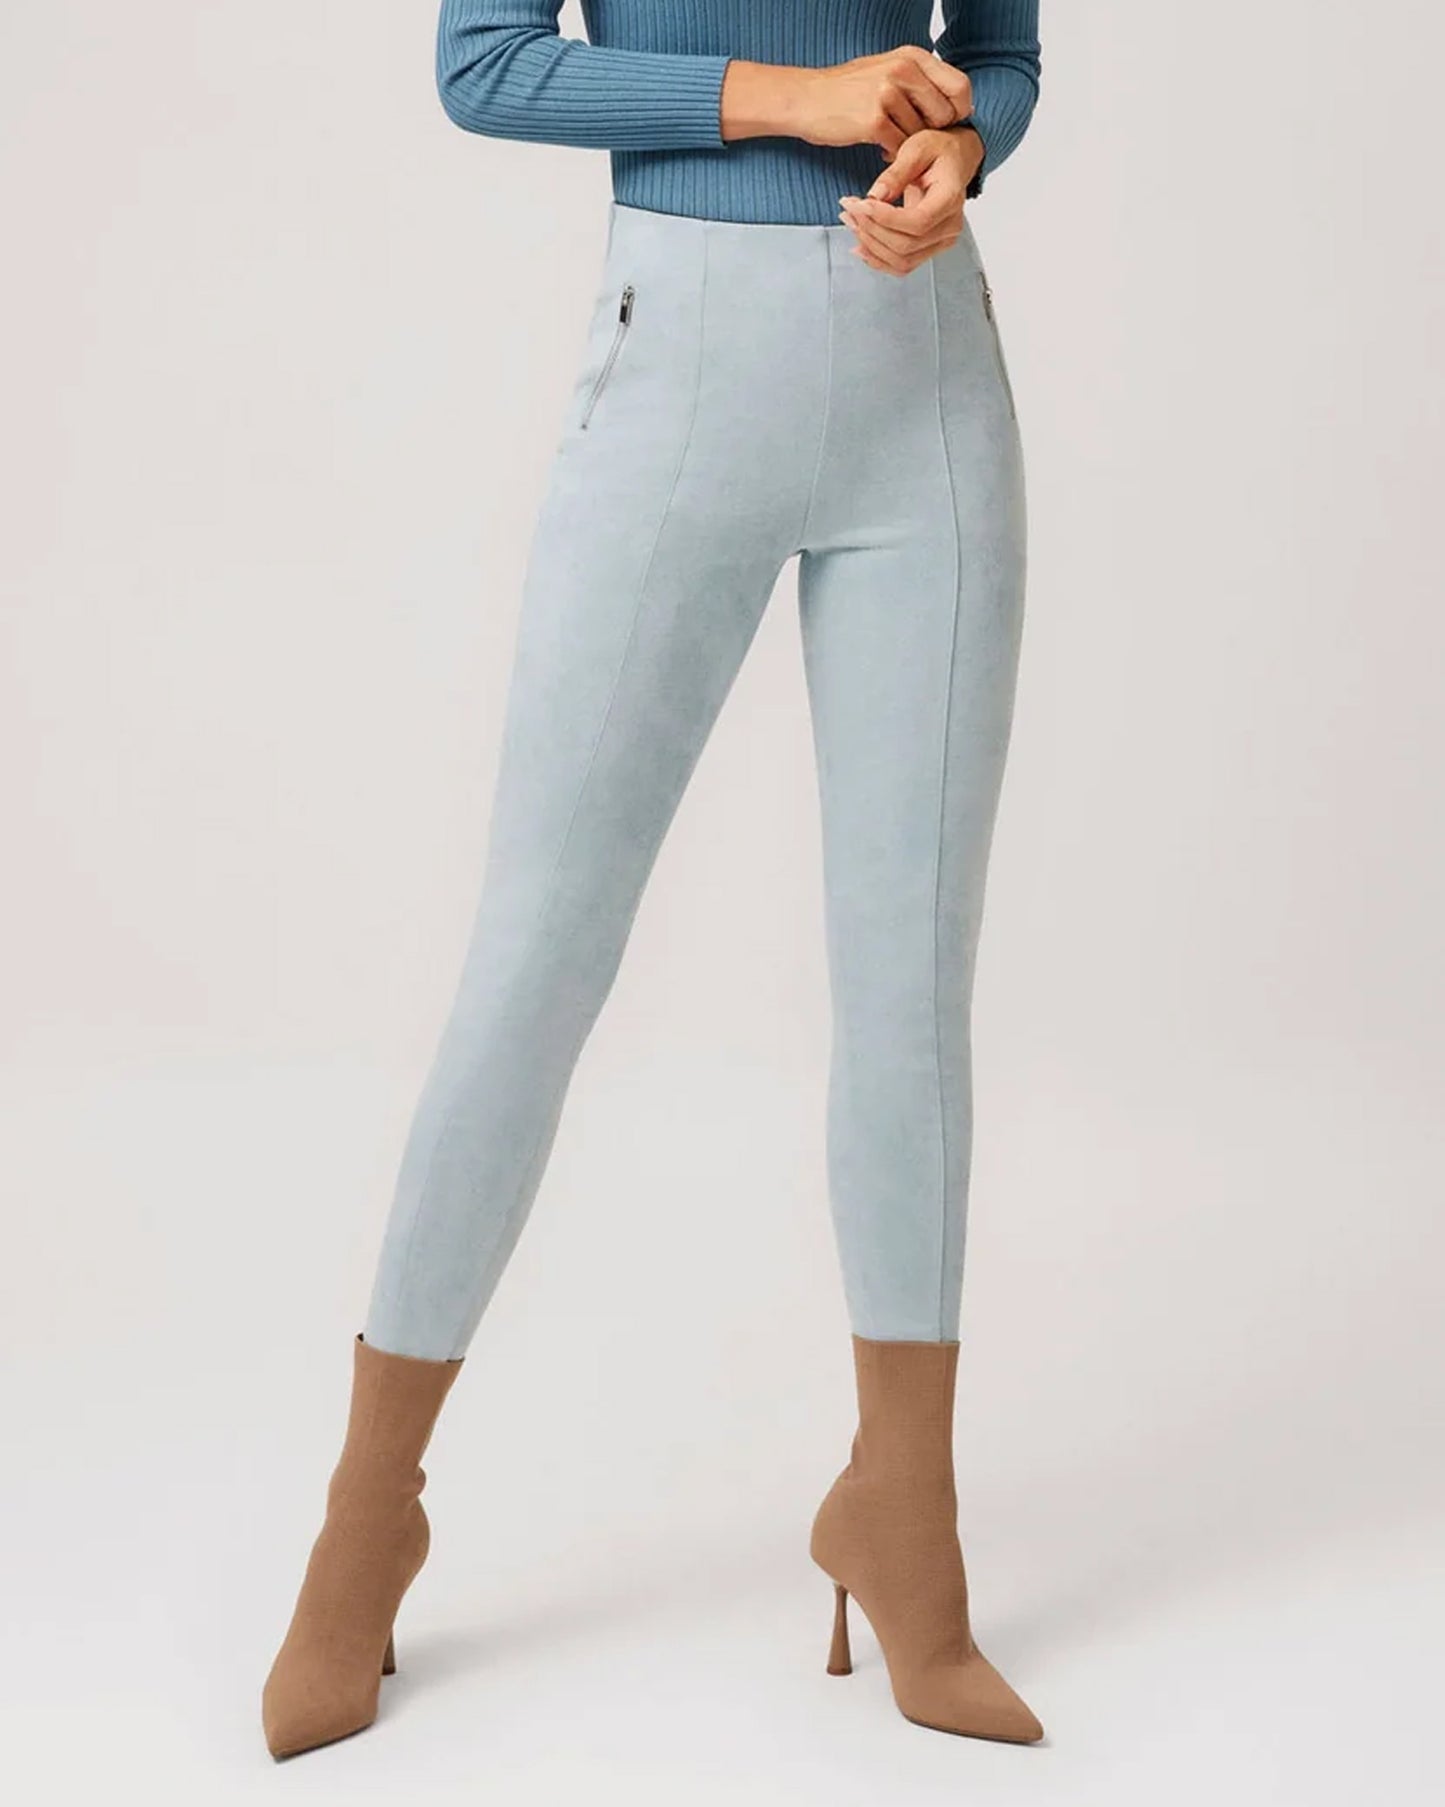 Ysabel Mora 70297 Faux Suede Leggings - Pale blue soft and plush faux suede high waisted trouser leggings (treggings) with raised seam down the front and zipper details on the sides.